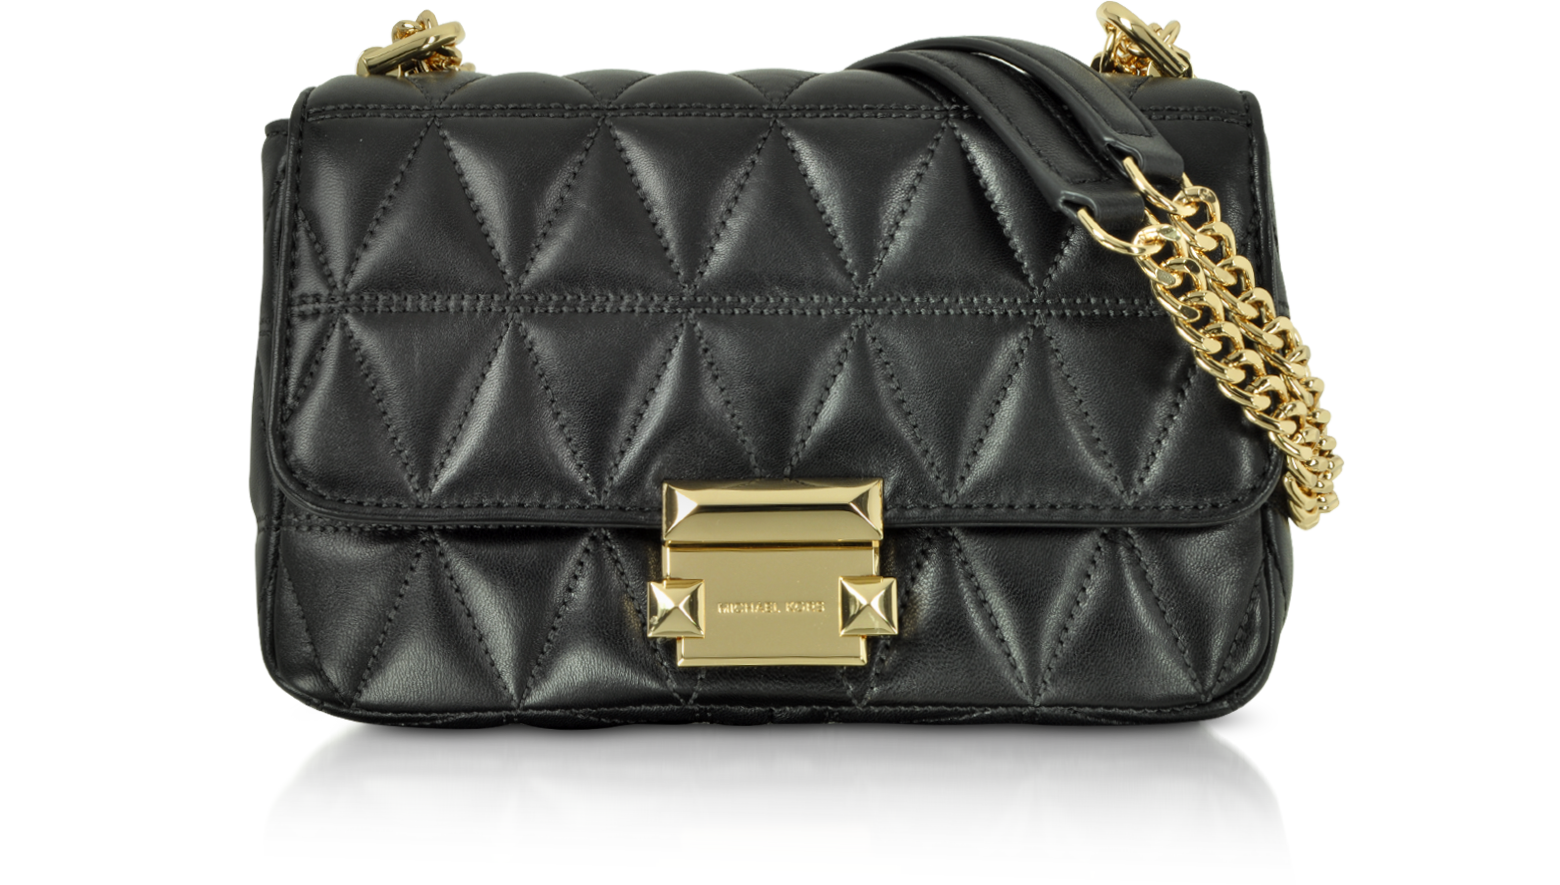 sloan small quilted leather shoulder bag